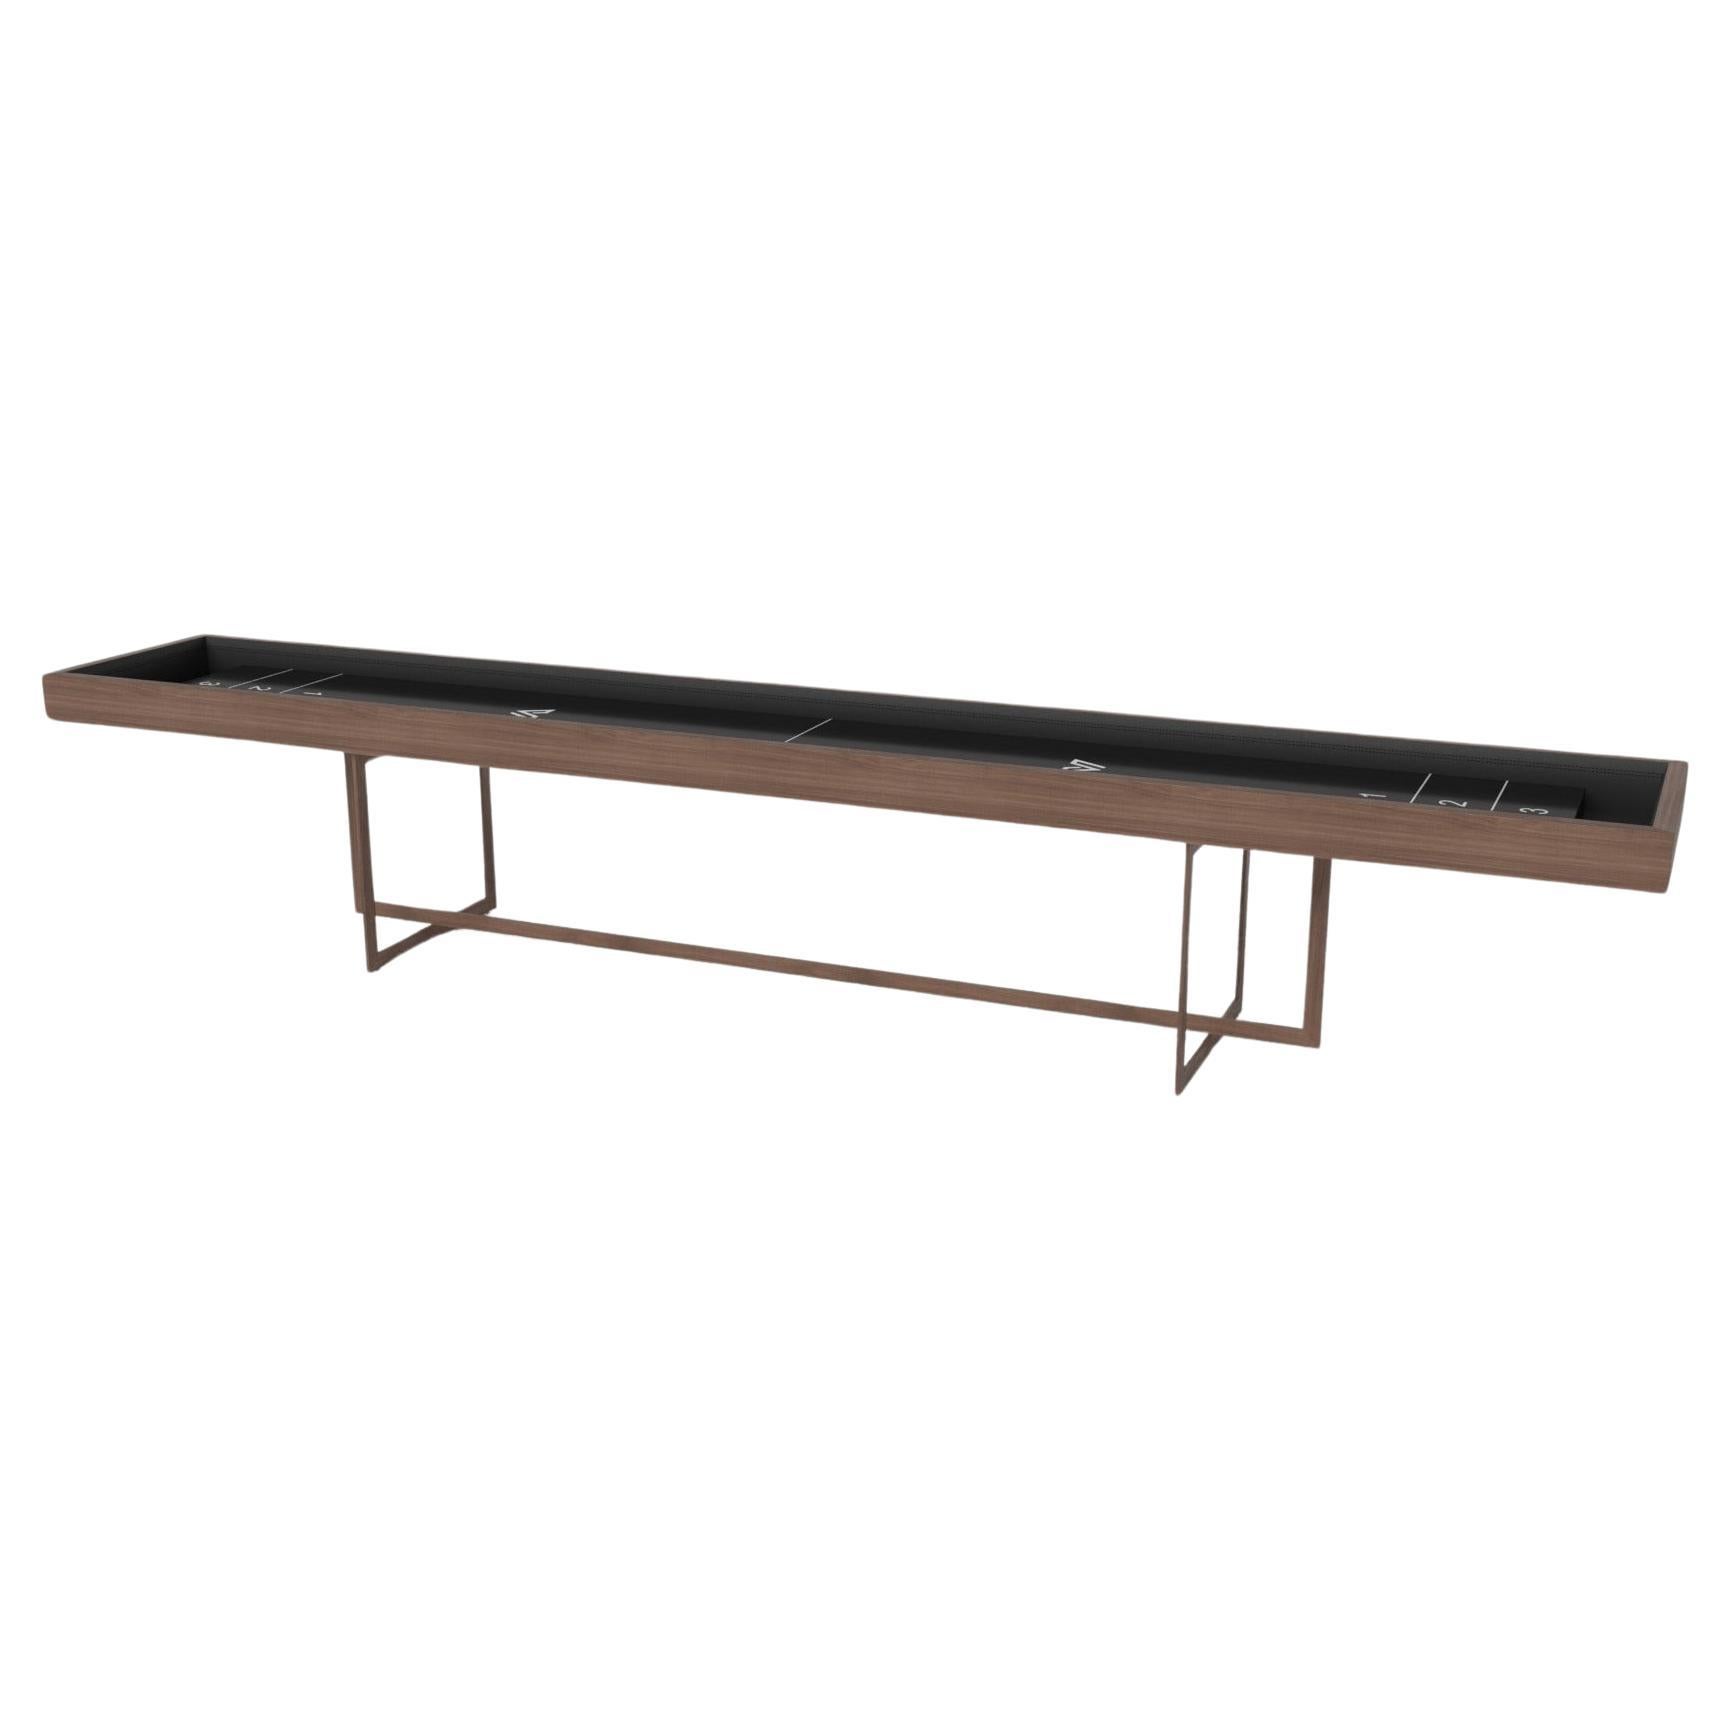 Elevate Customs Beso Shuffleboard Tables / Solid Walnut Wood in 16' -Made in USA For Sale